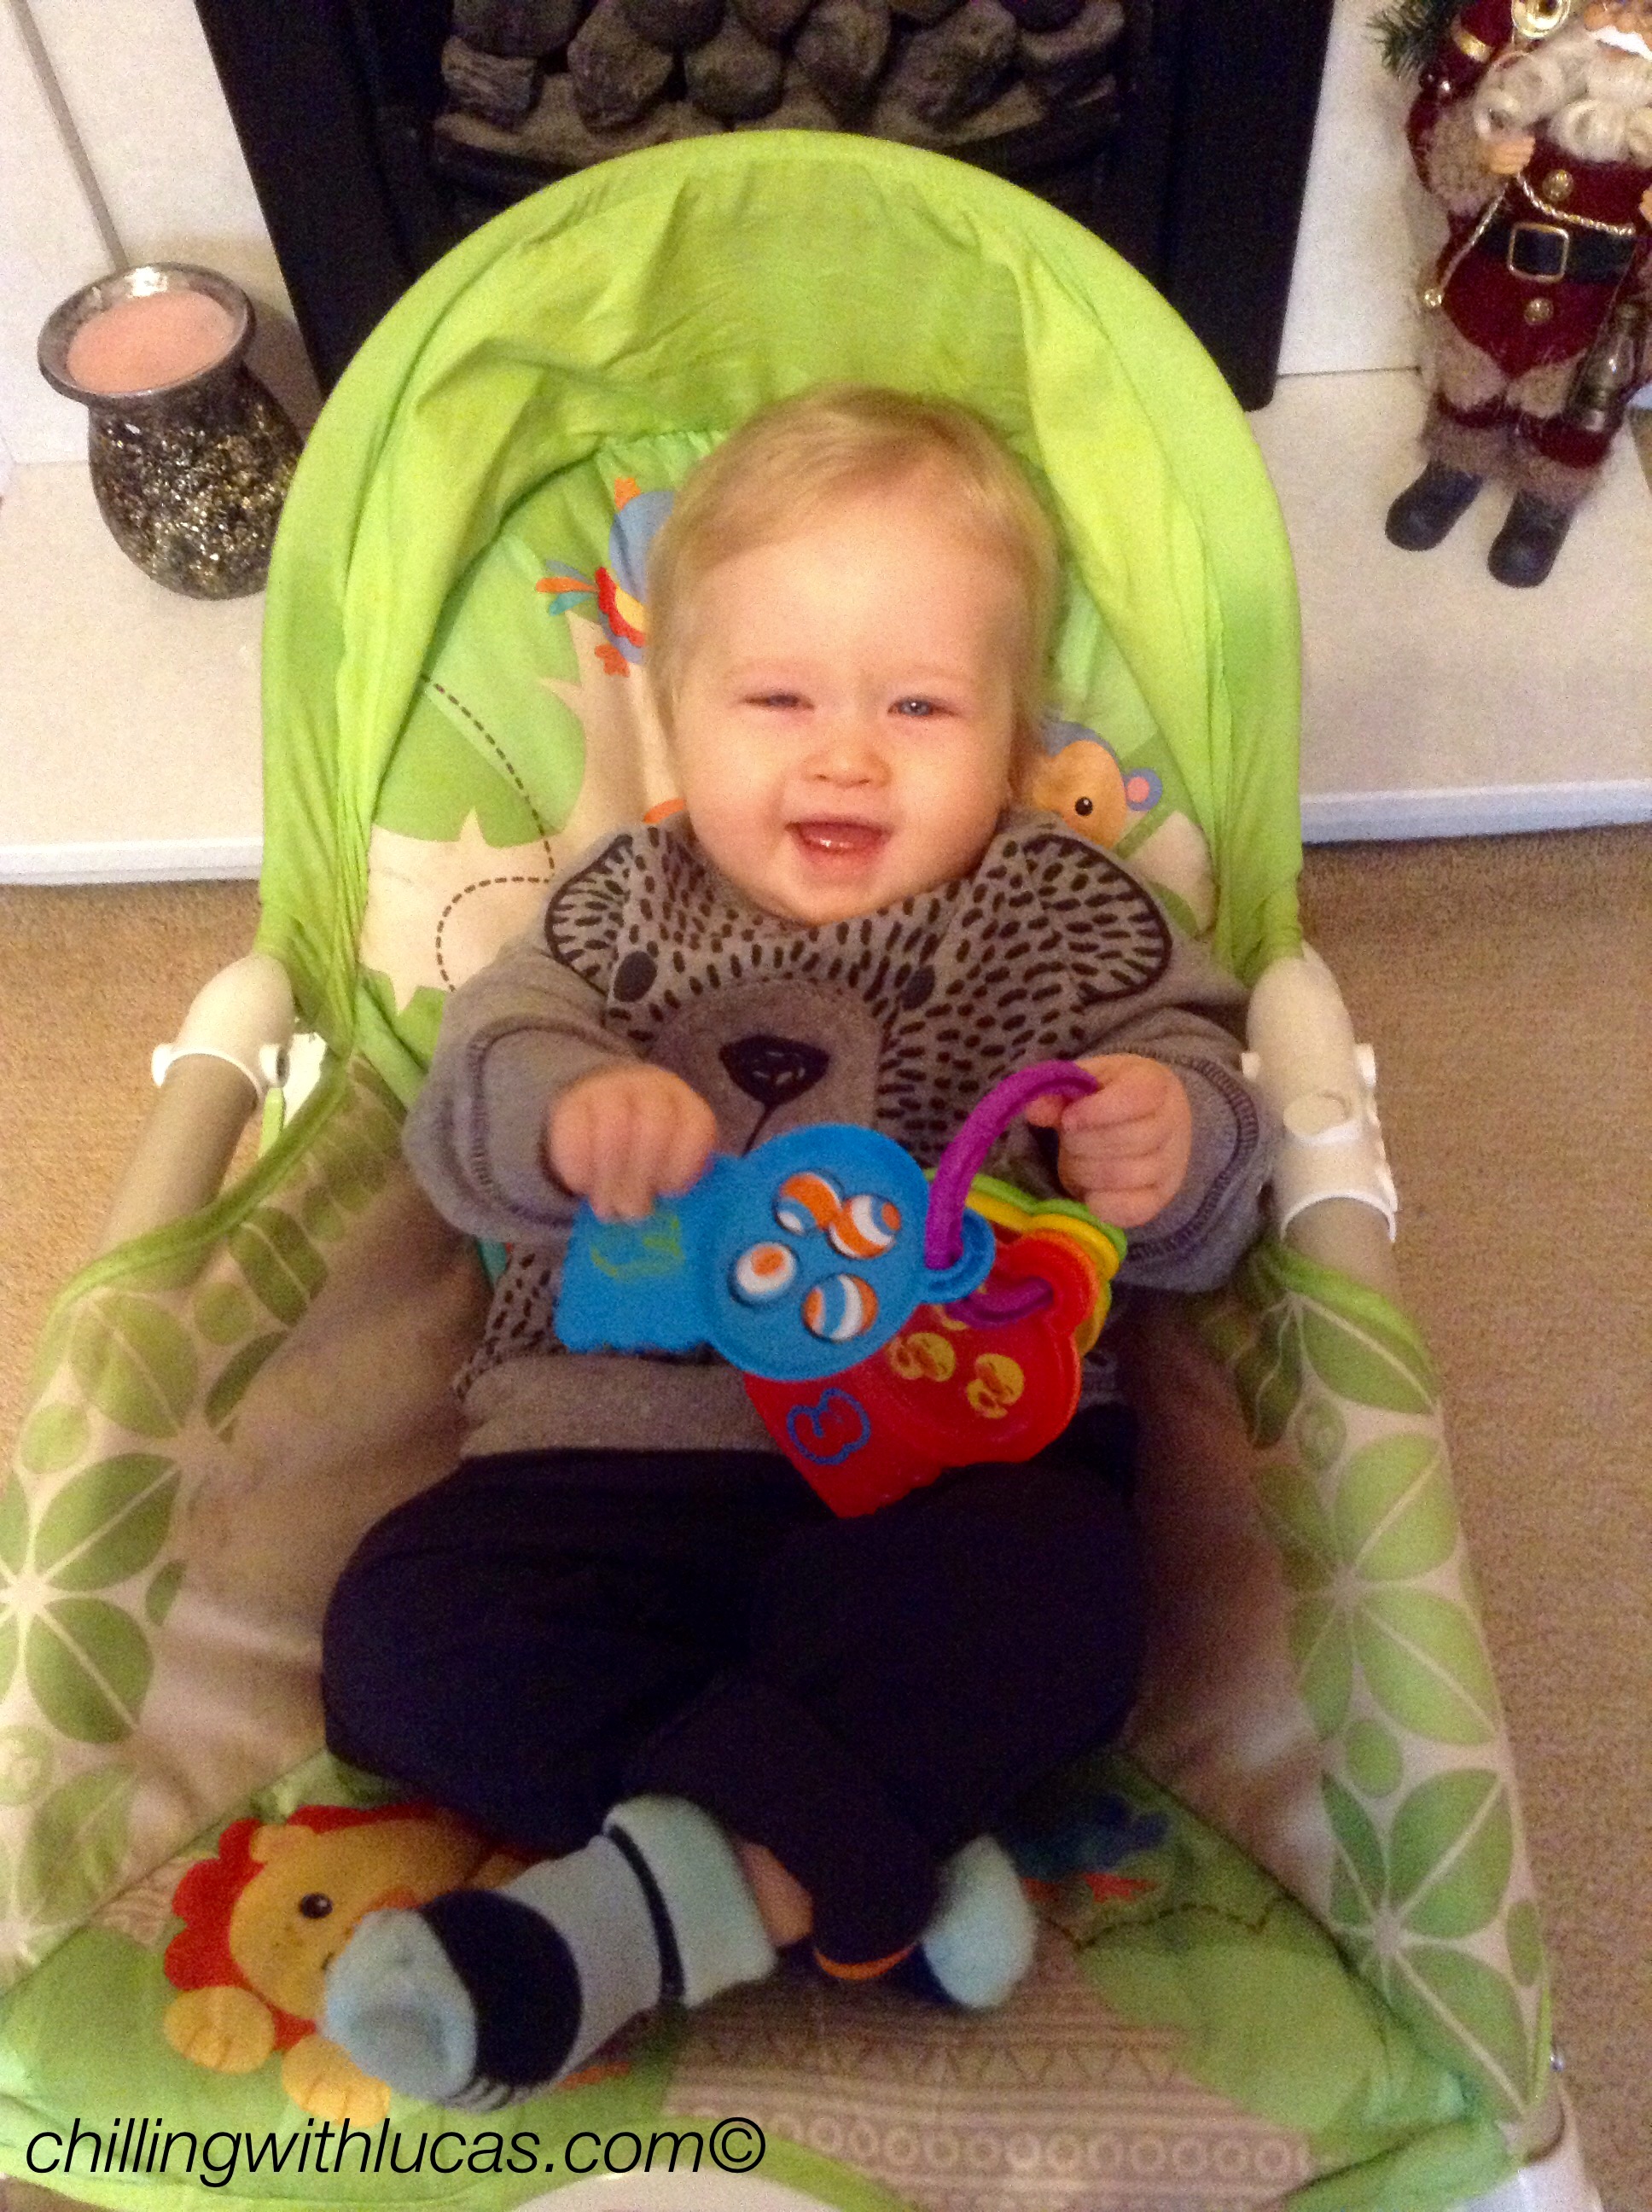 Lucas sitting in his chair wearing navy trousers and a grey bear jumper